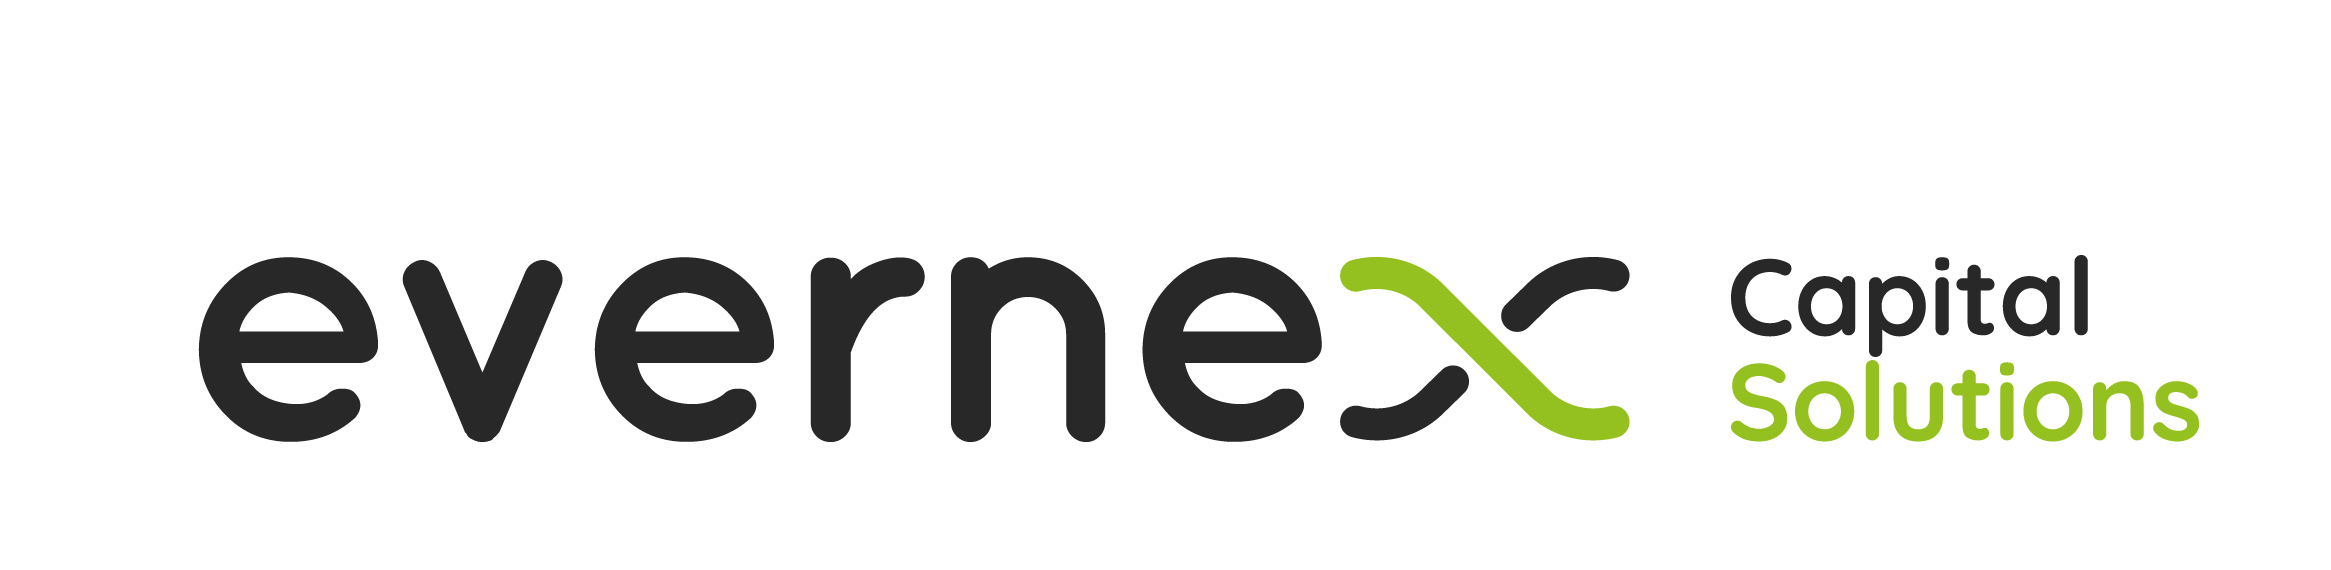 Evernex capital solutions